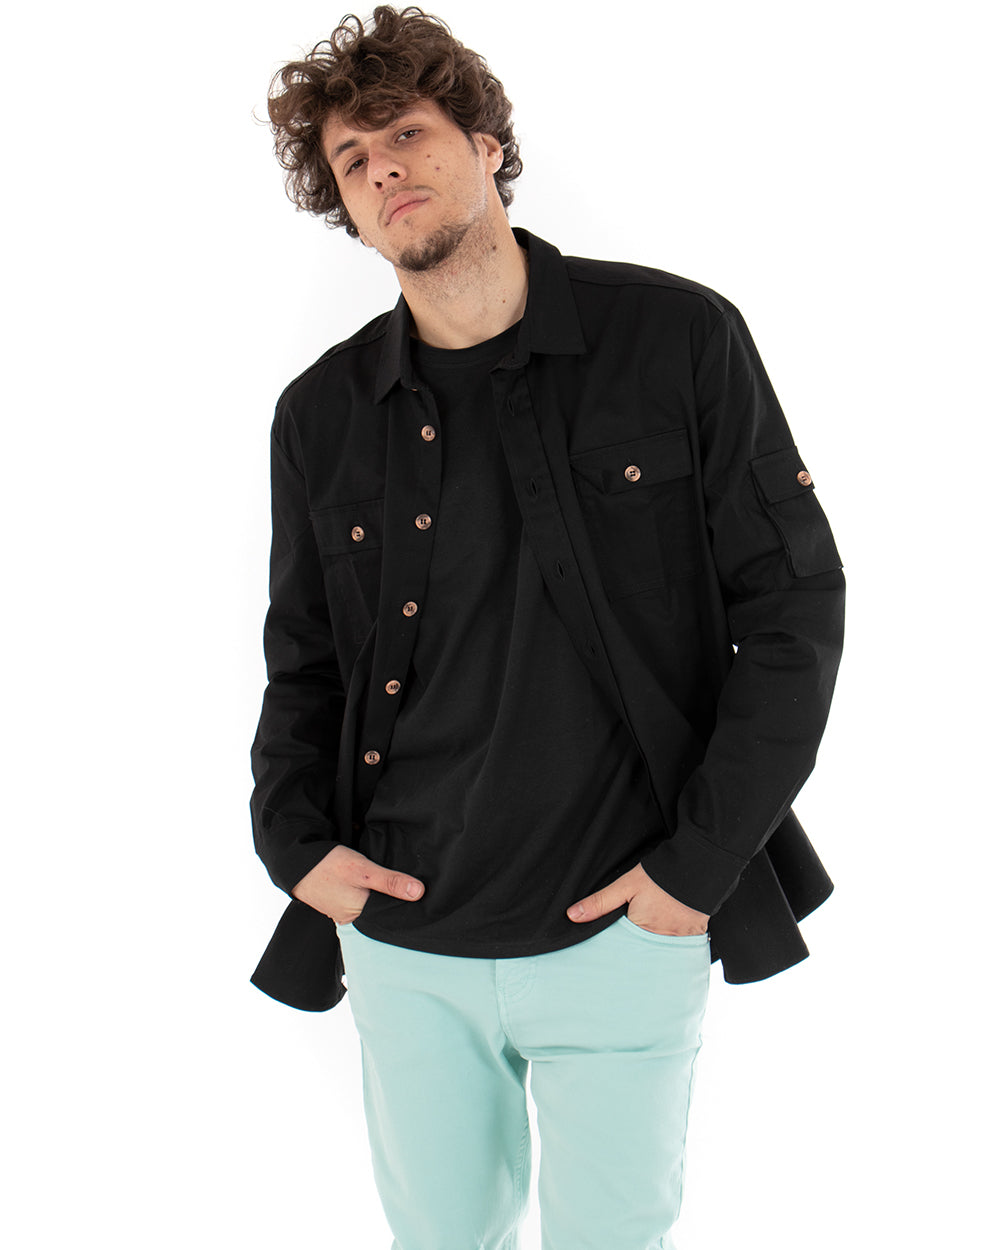 Men's Shirt With Collar Long Sleeve Casual Black Cotton GIOSAL-C1862A